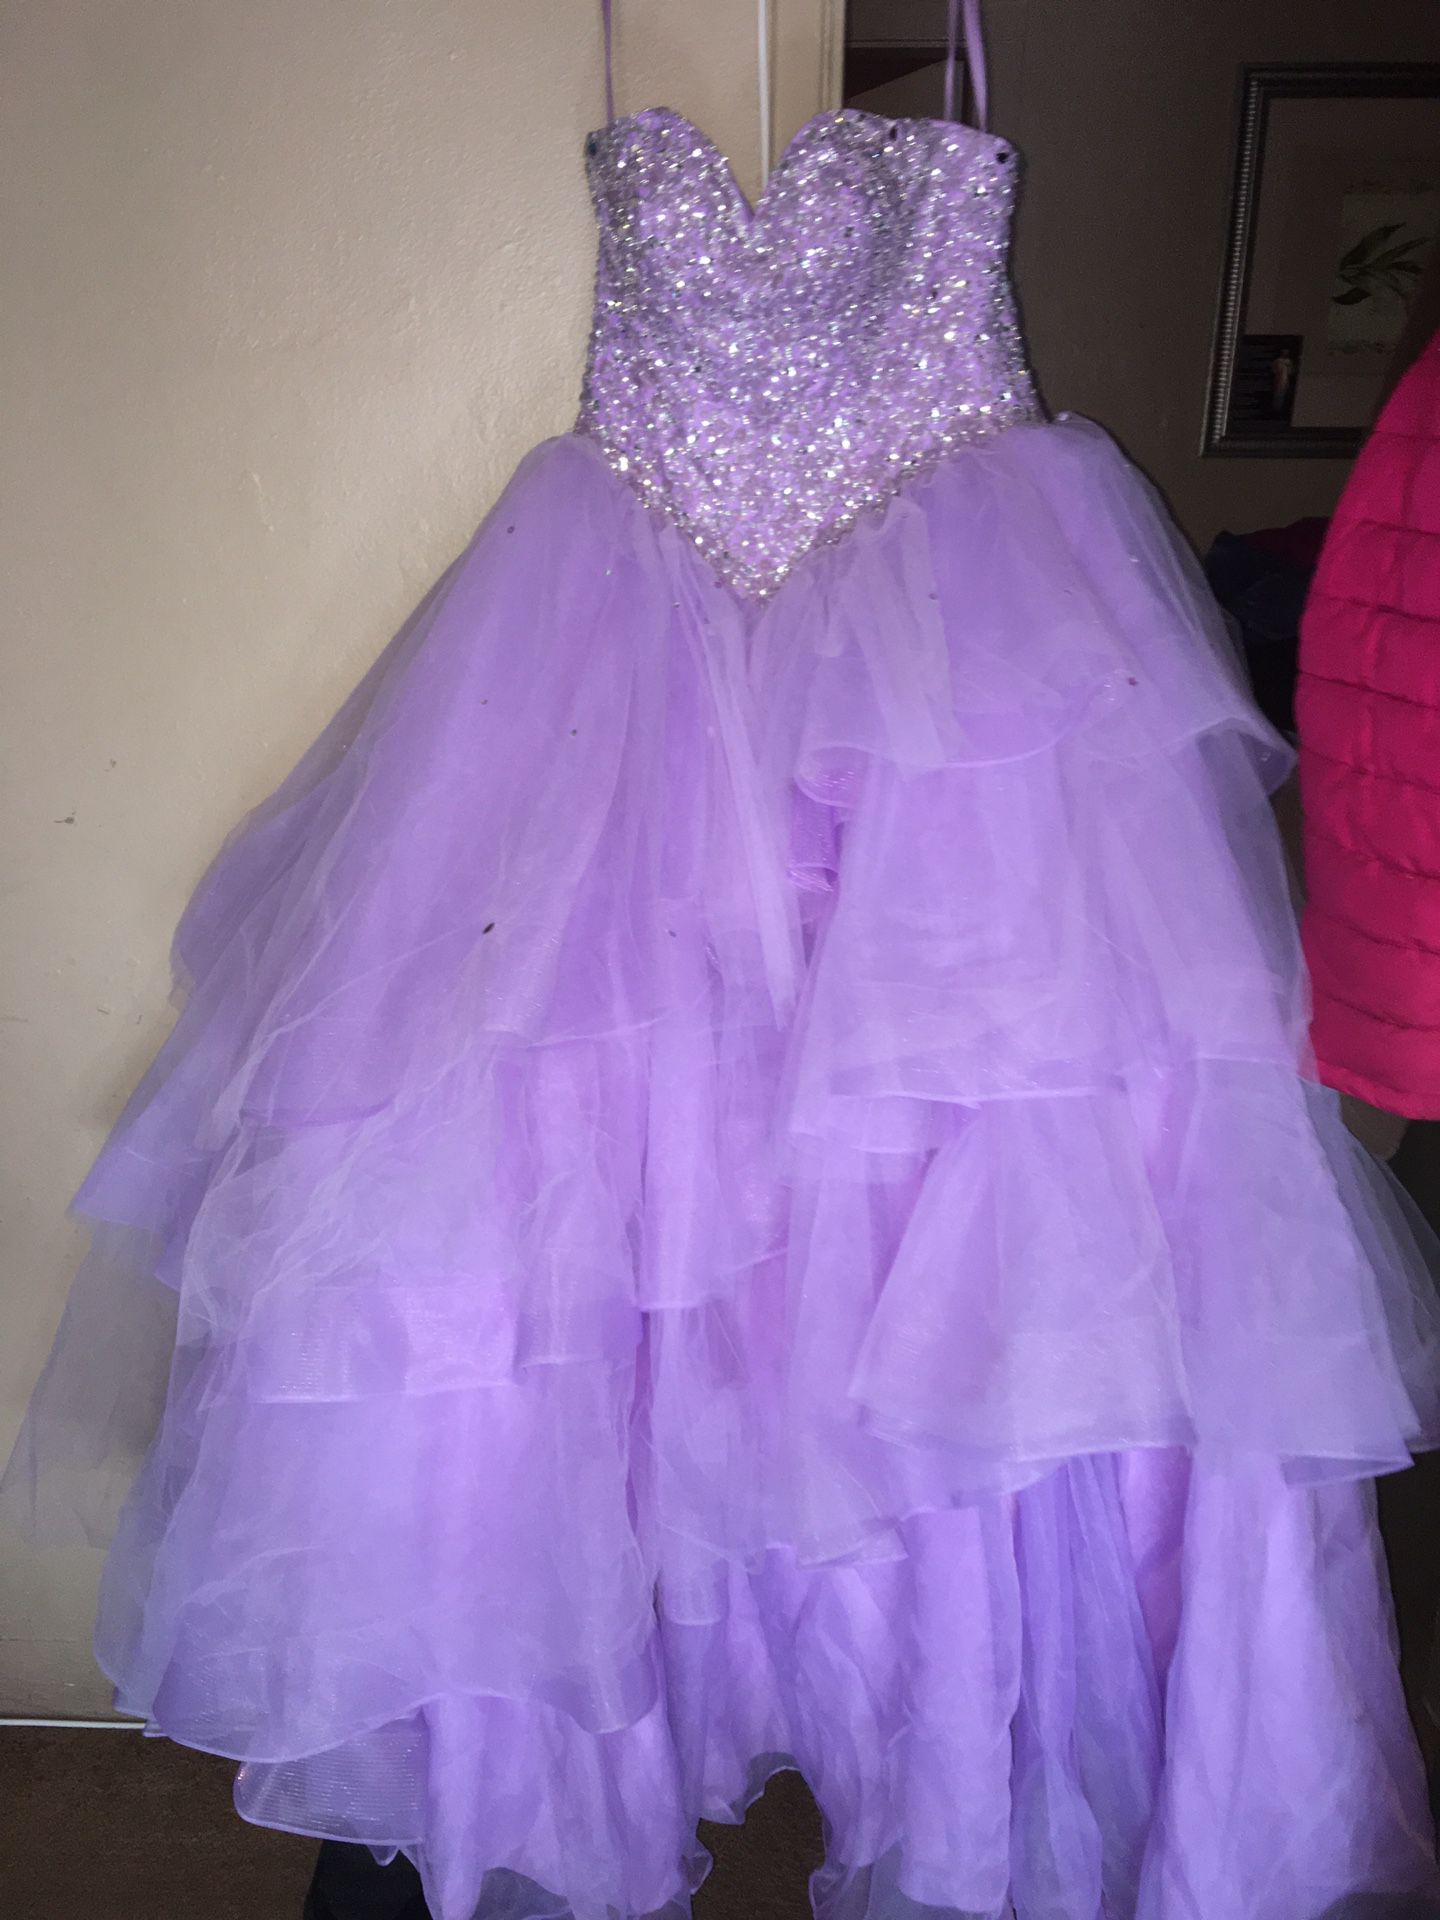 Quinceañera 15 dress in good condition just worn once